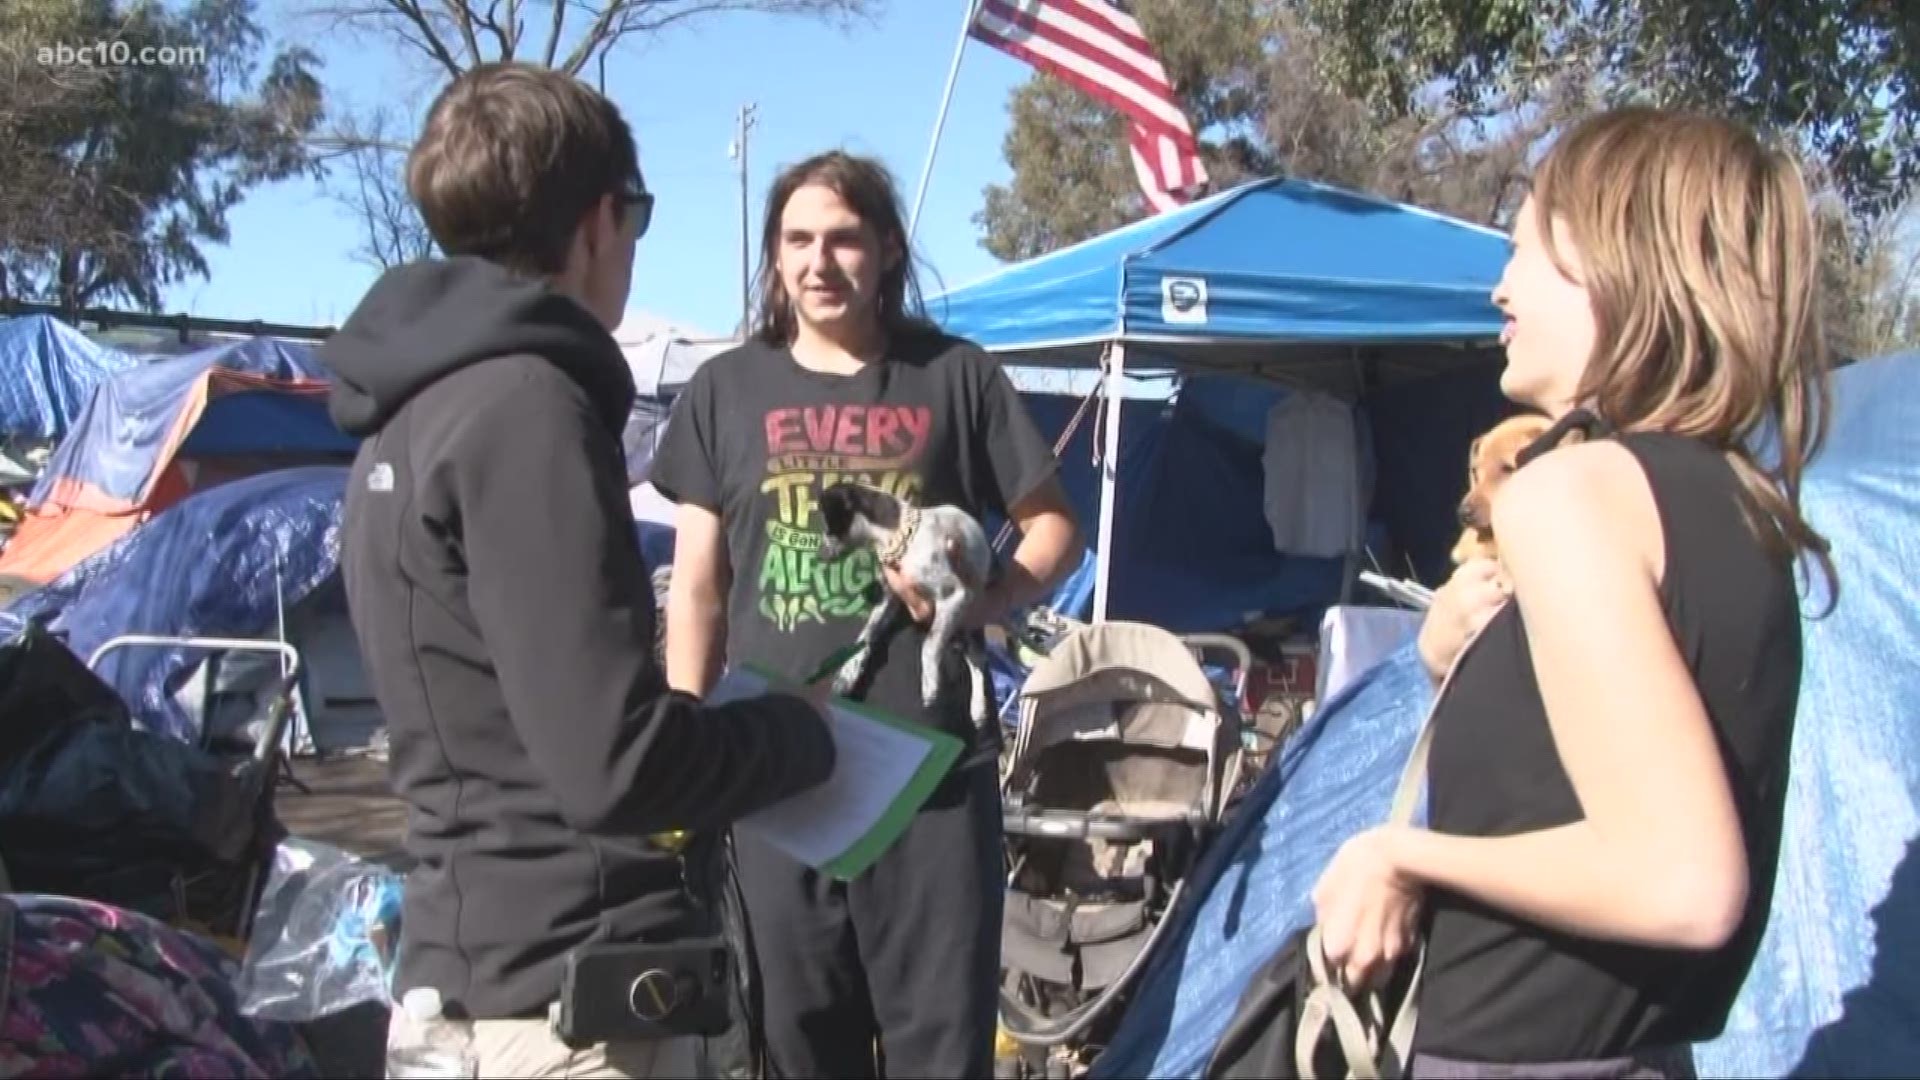 More than 230 volunteers hit the ground running at 6:30 a.m. to interview every homeless person in Stanislaus County they could find. Multiple agencies mapped out exactly where homeless people have been known to stay within Stanislaus County lines.